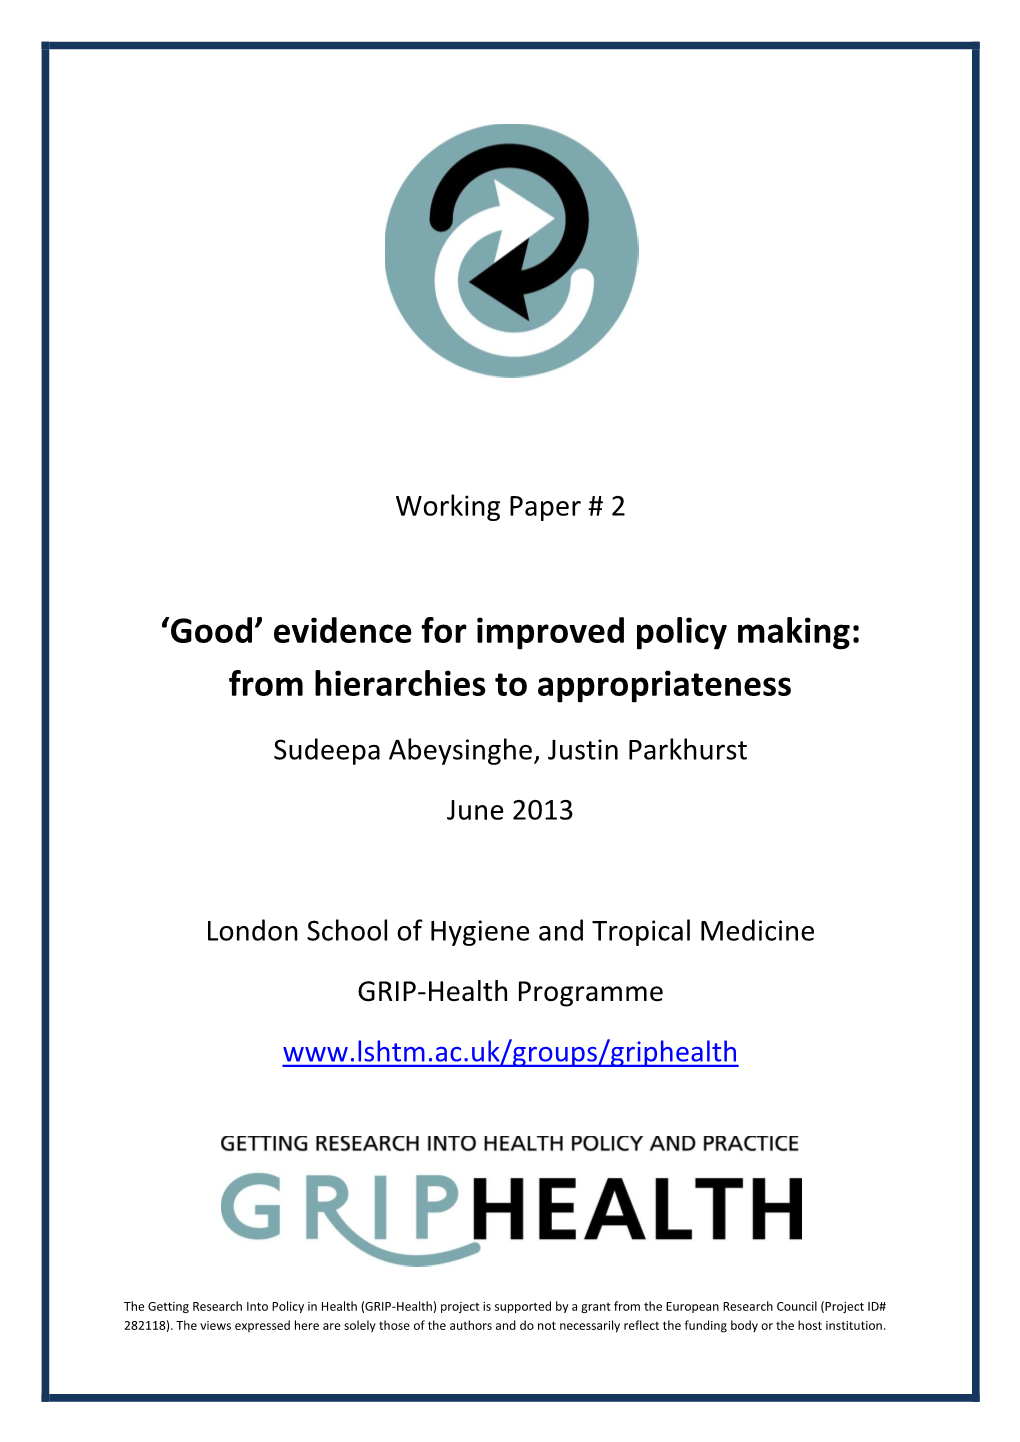 Evidence for Improved Policy Making: from Hierarchies to Appropriateness